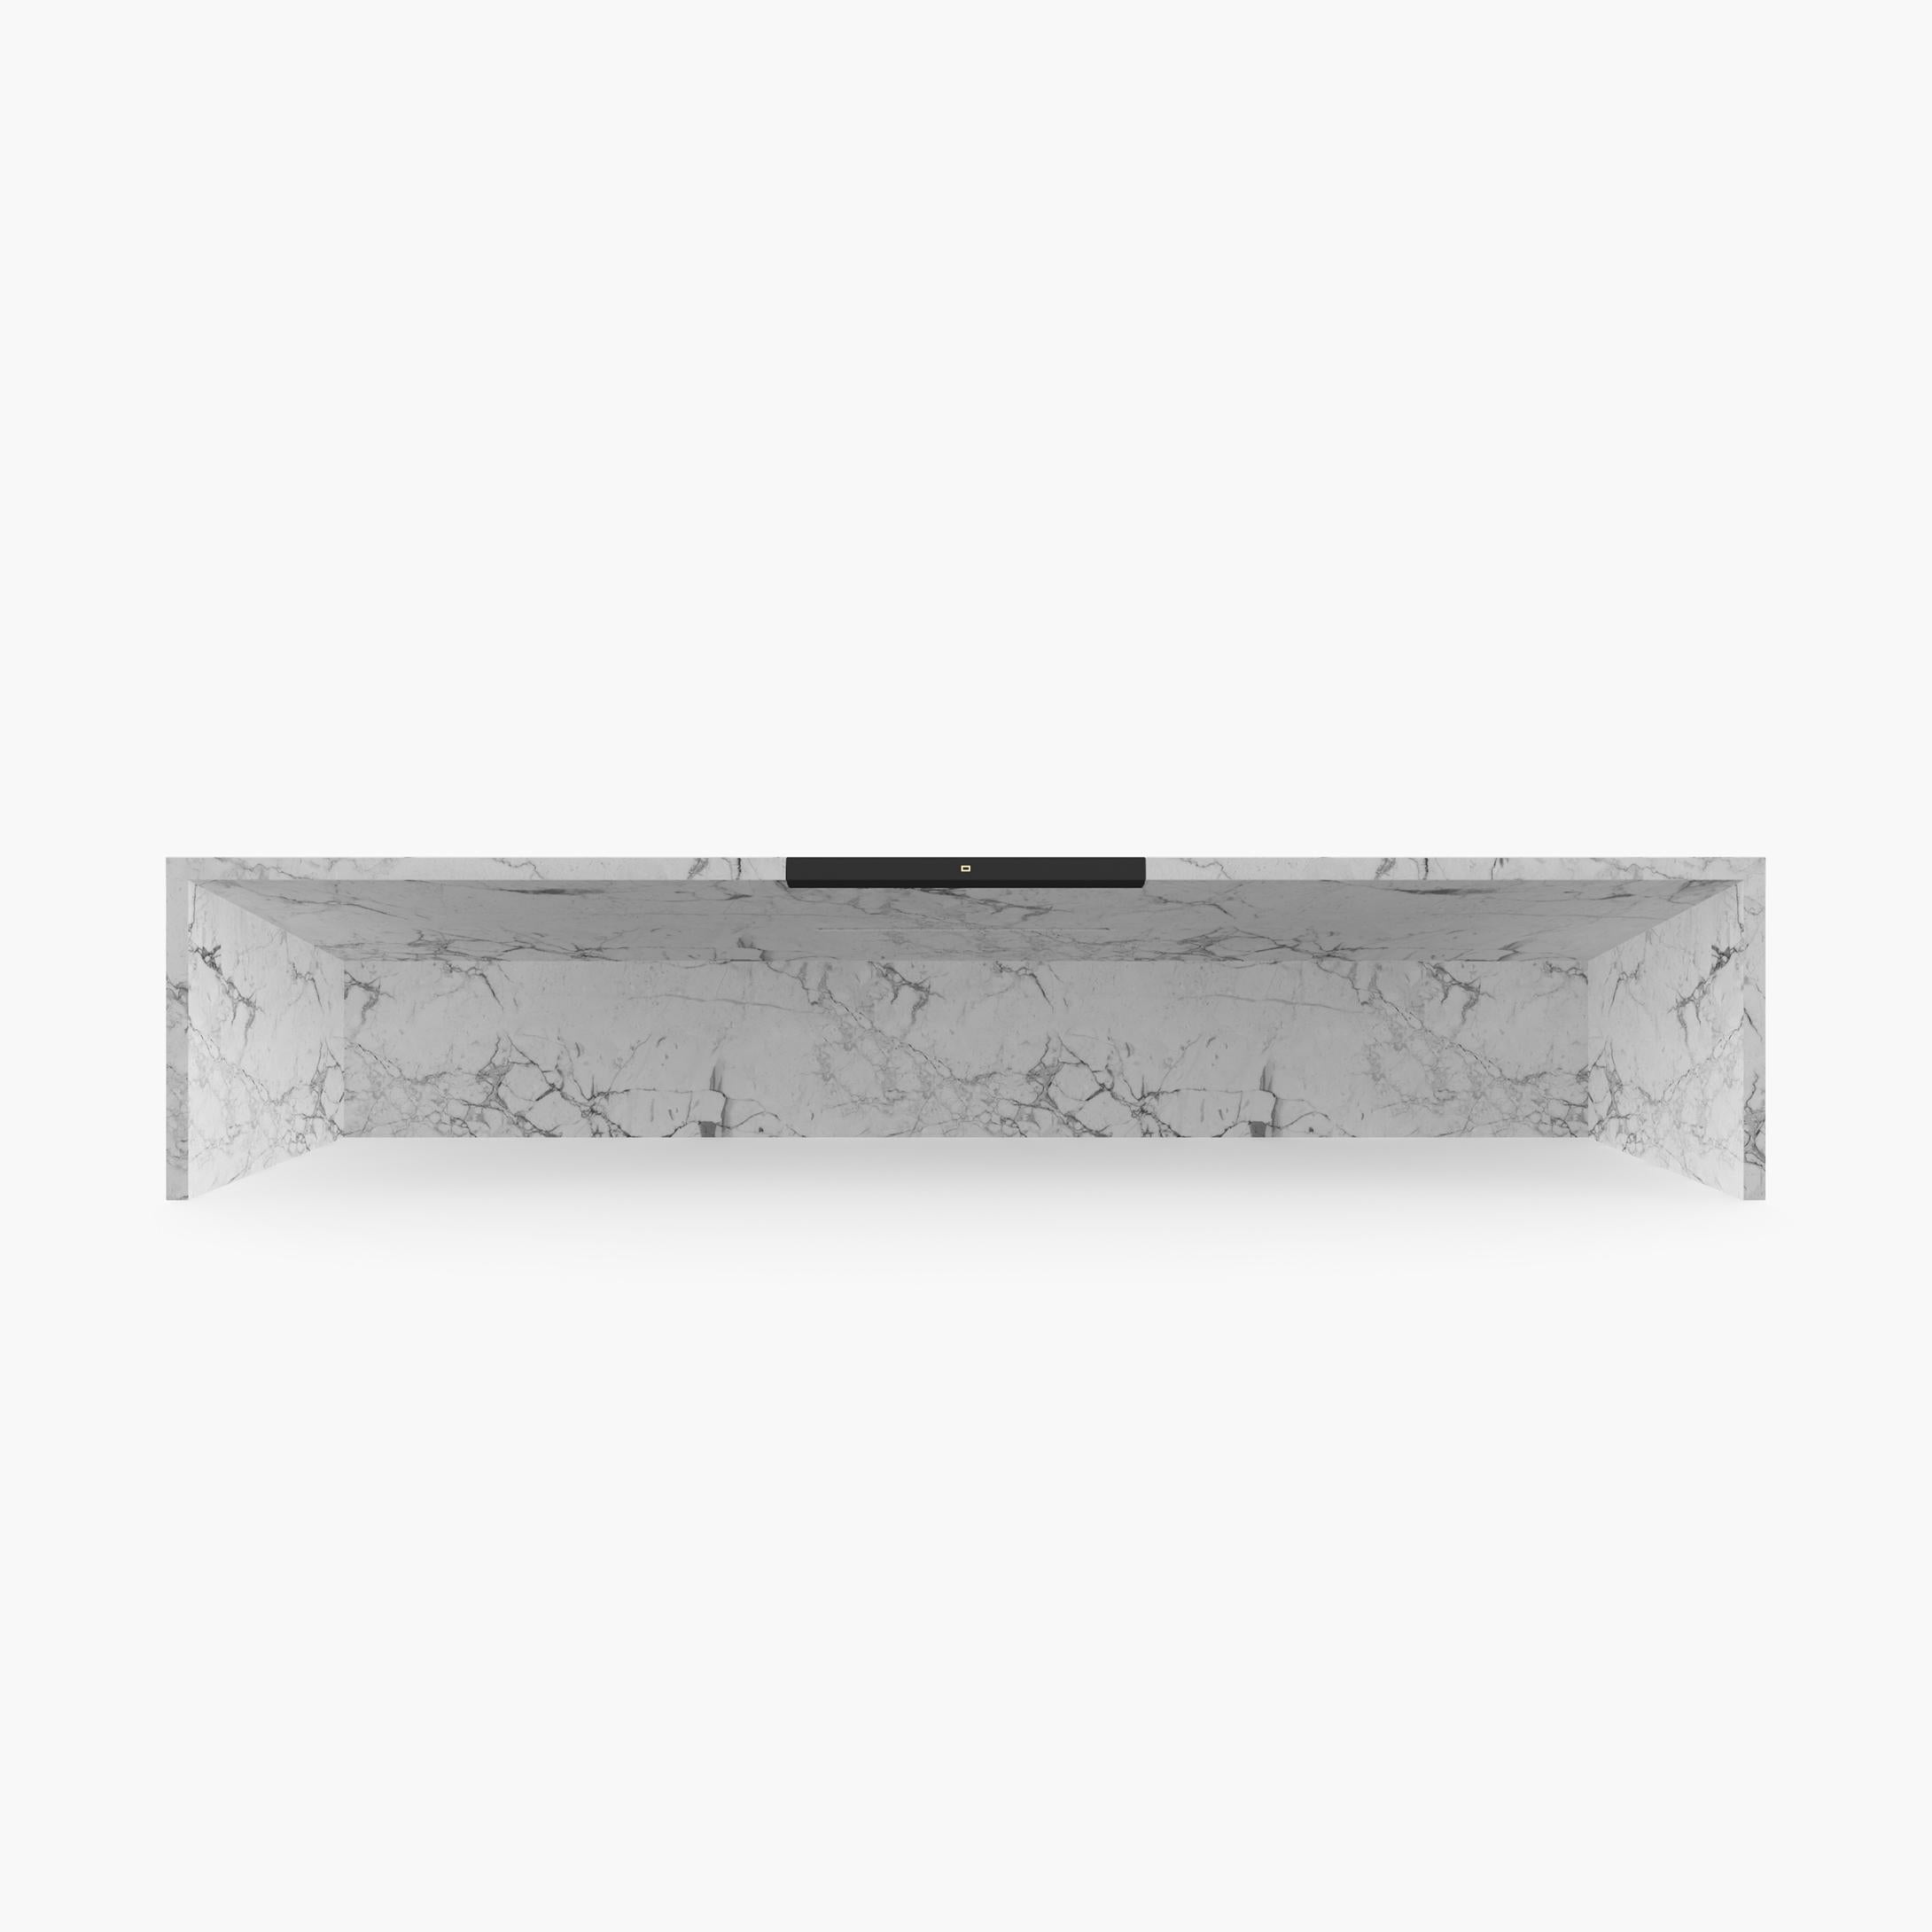 European Cuboid Desk, White Marble, 400x75x75cm Leather Drawer, Germany Handcrafted pc1/1 For Sale